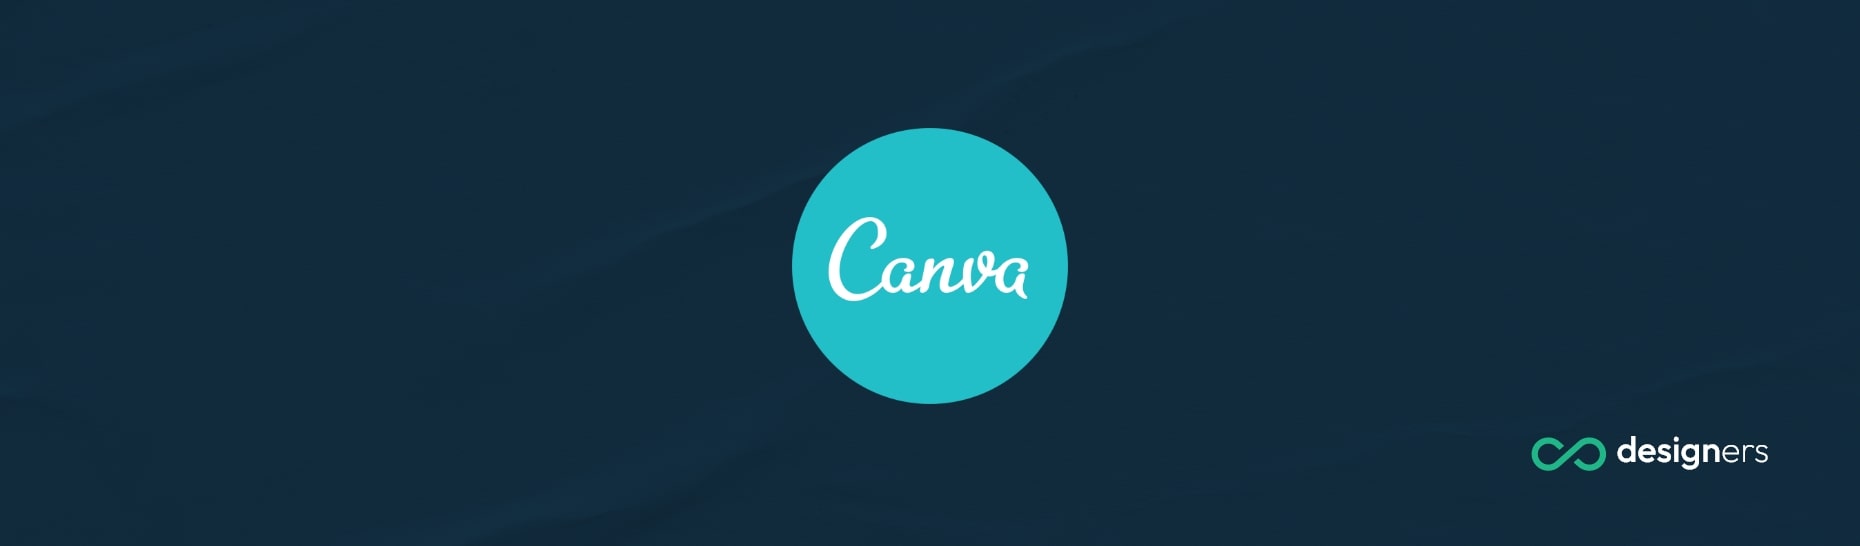 Does Canva Have Analytics?